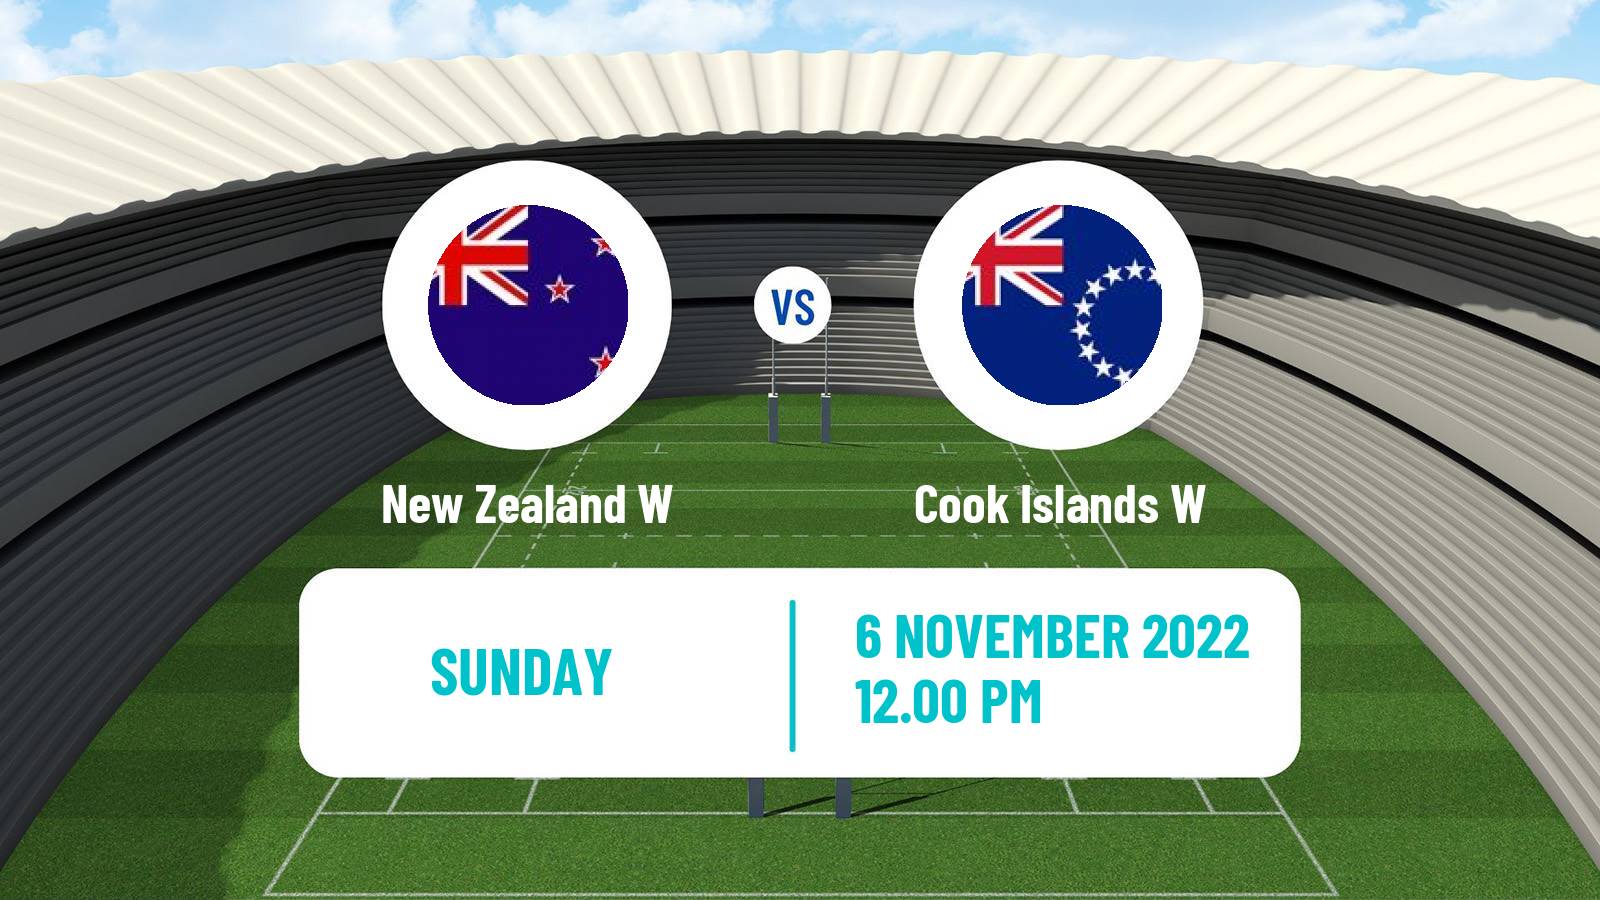 Rugby league World Cup Rugby League Women New Zealand W - Cook Islands W